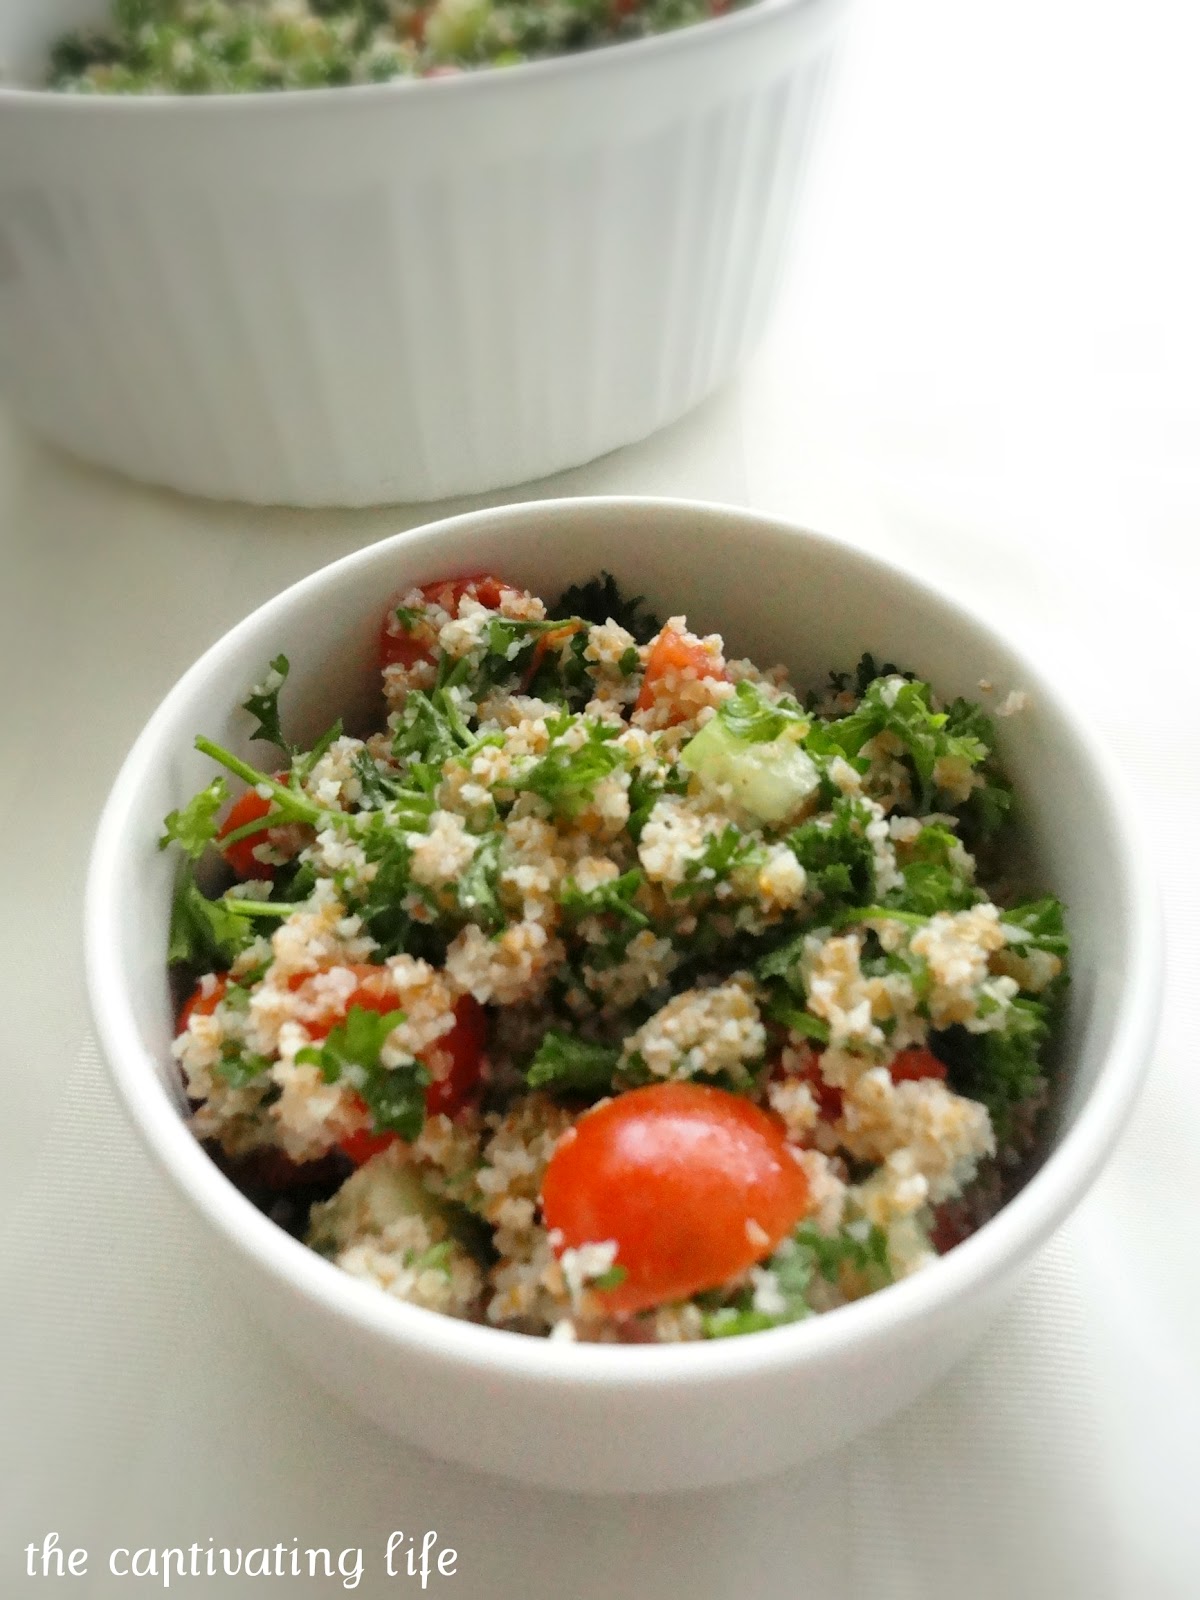 The Captivating Life: Tabouleh